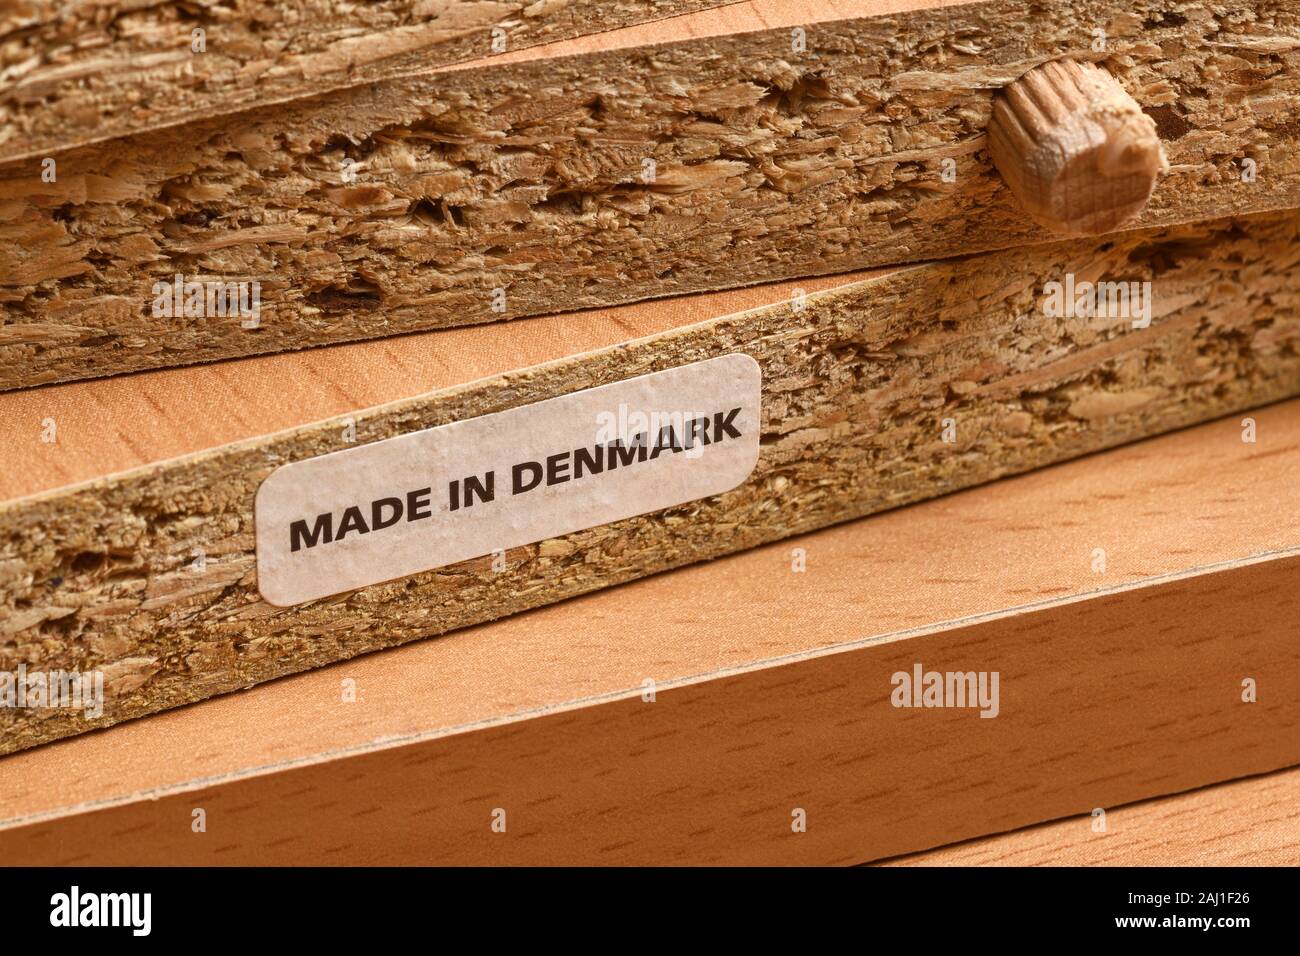 Close up detail of a label on some flat pack chipboard furniture indicating Made In Denmark Stock Photo